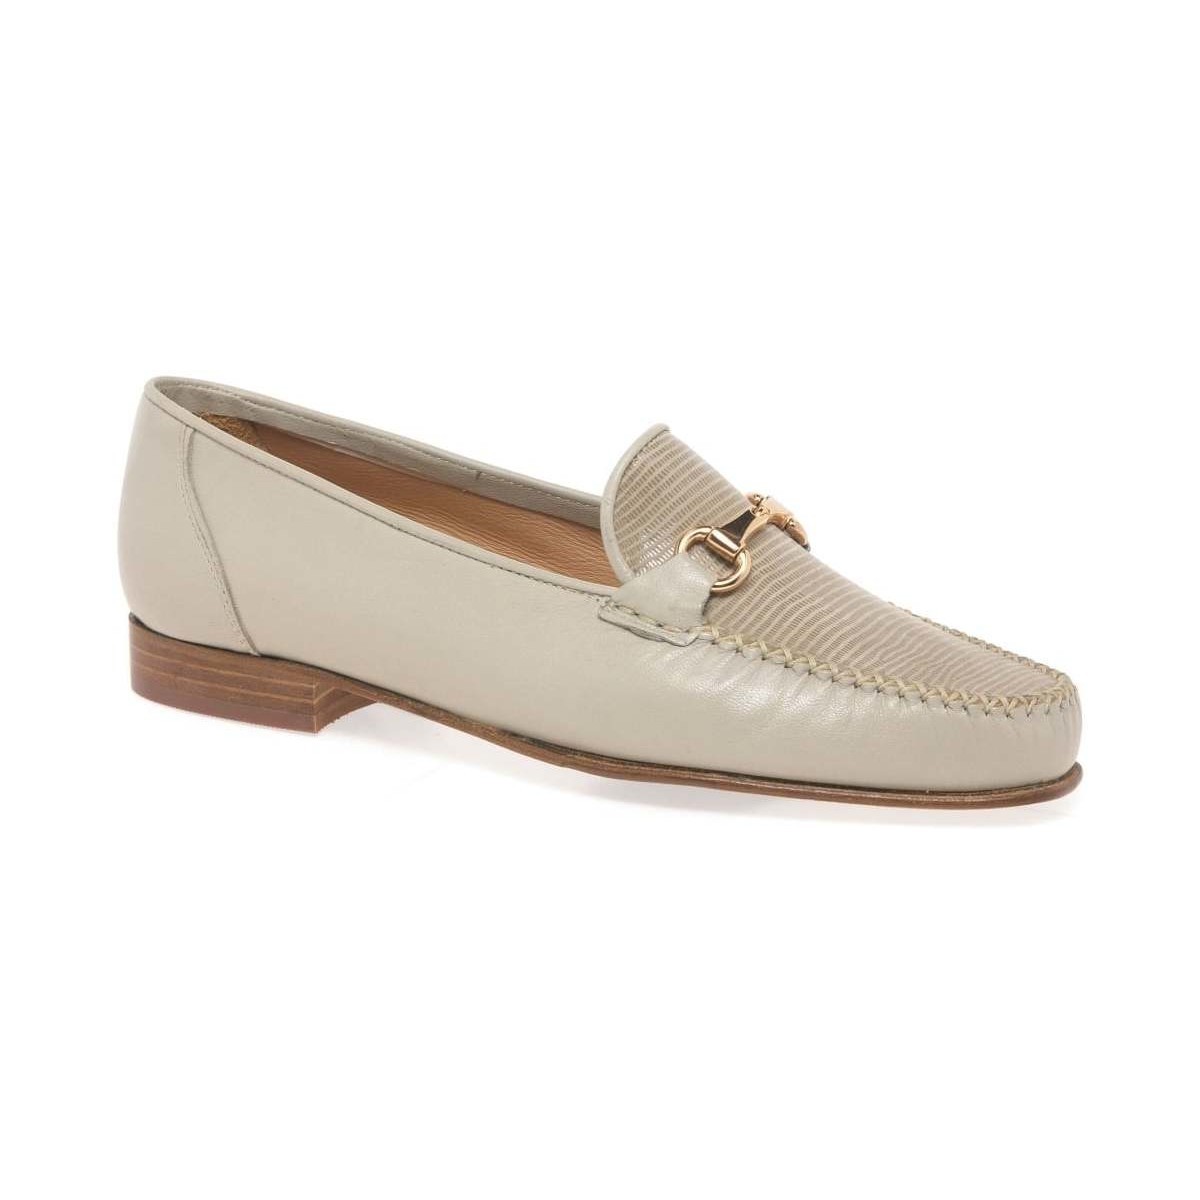 Shoes Women Derby Shoes & Brogues Charles Clinkard Charm Womens Moccasins Beige